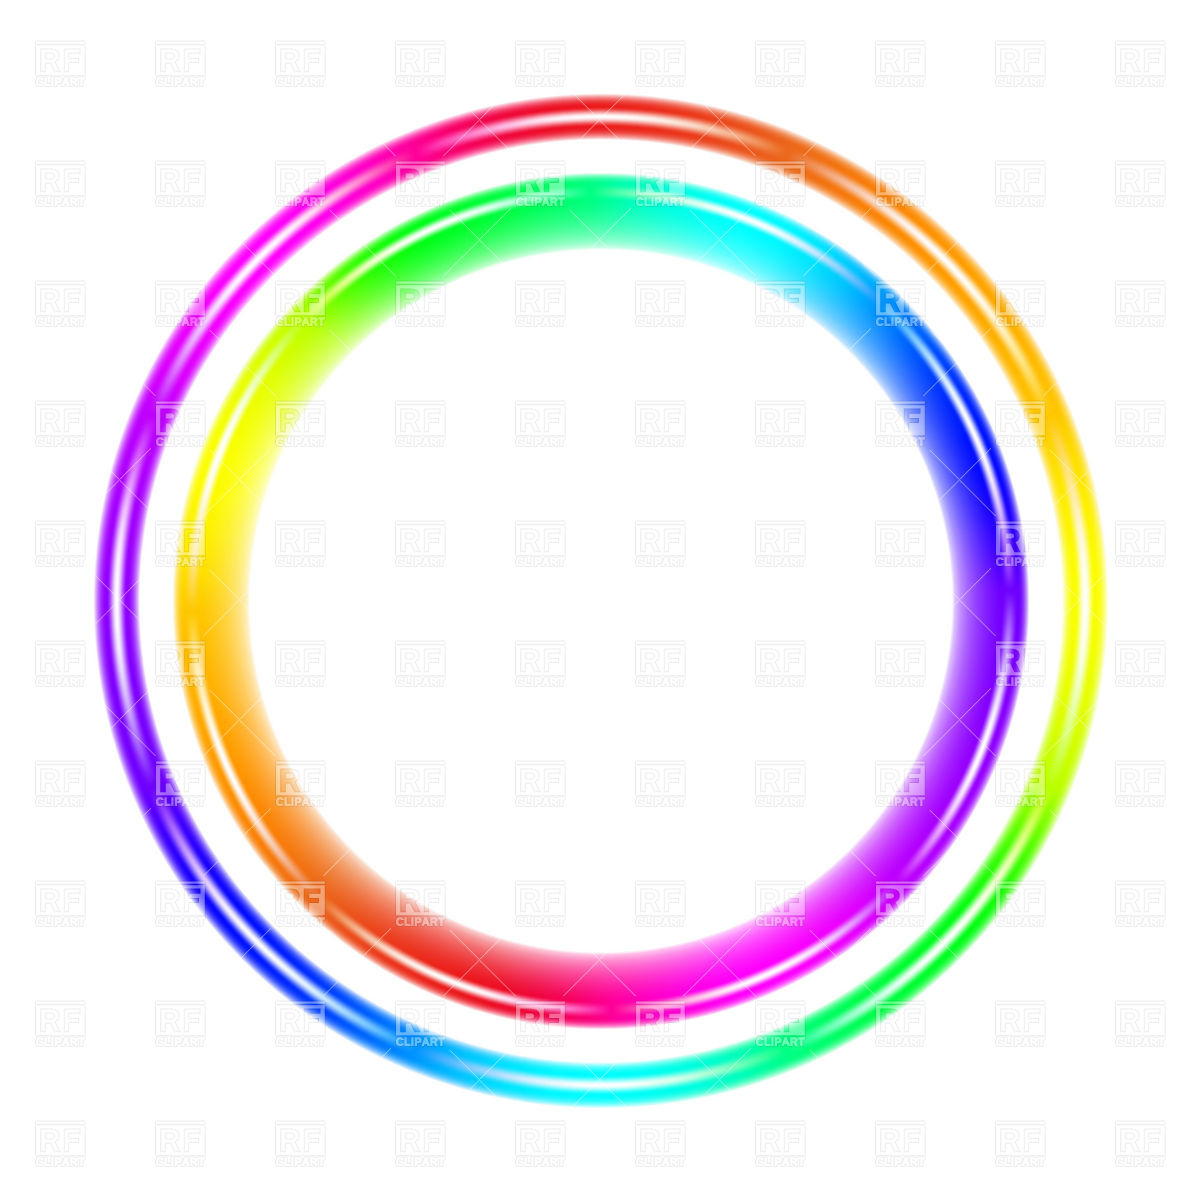 Color Wheel Spectrum Circle Download Royalty Free Vector Clipart  Eps    